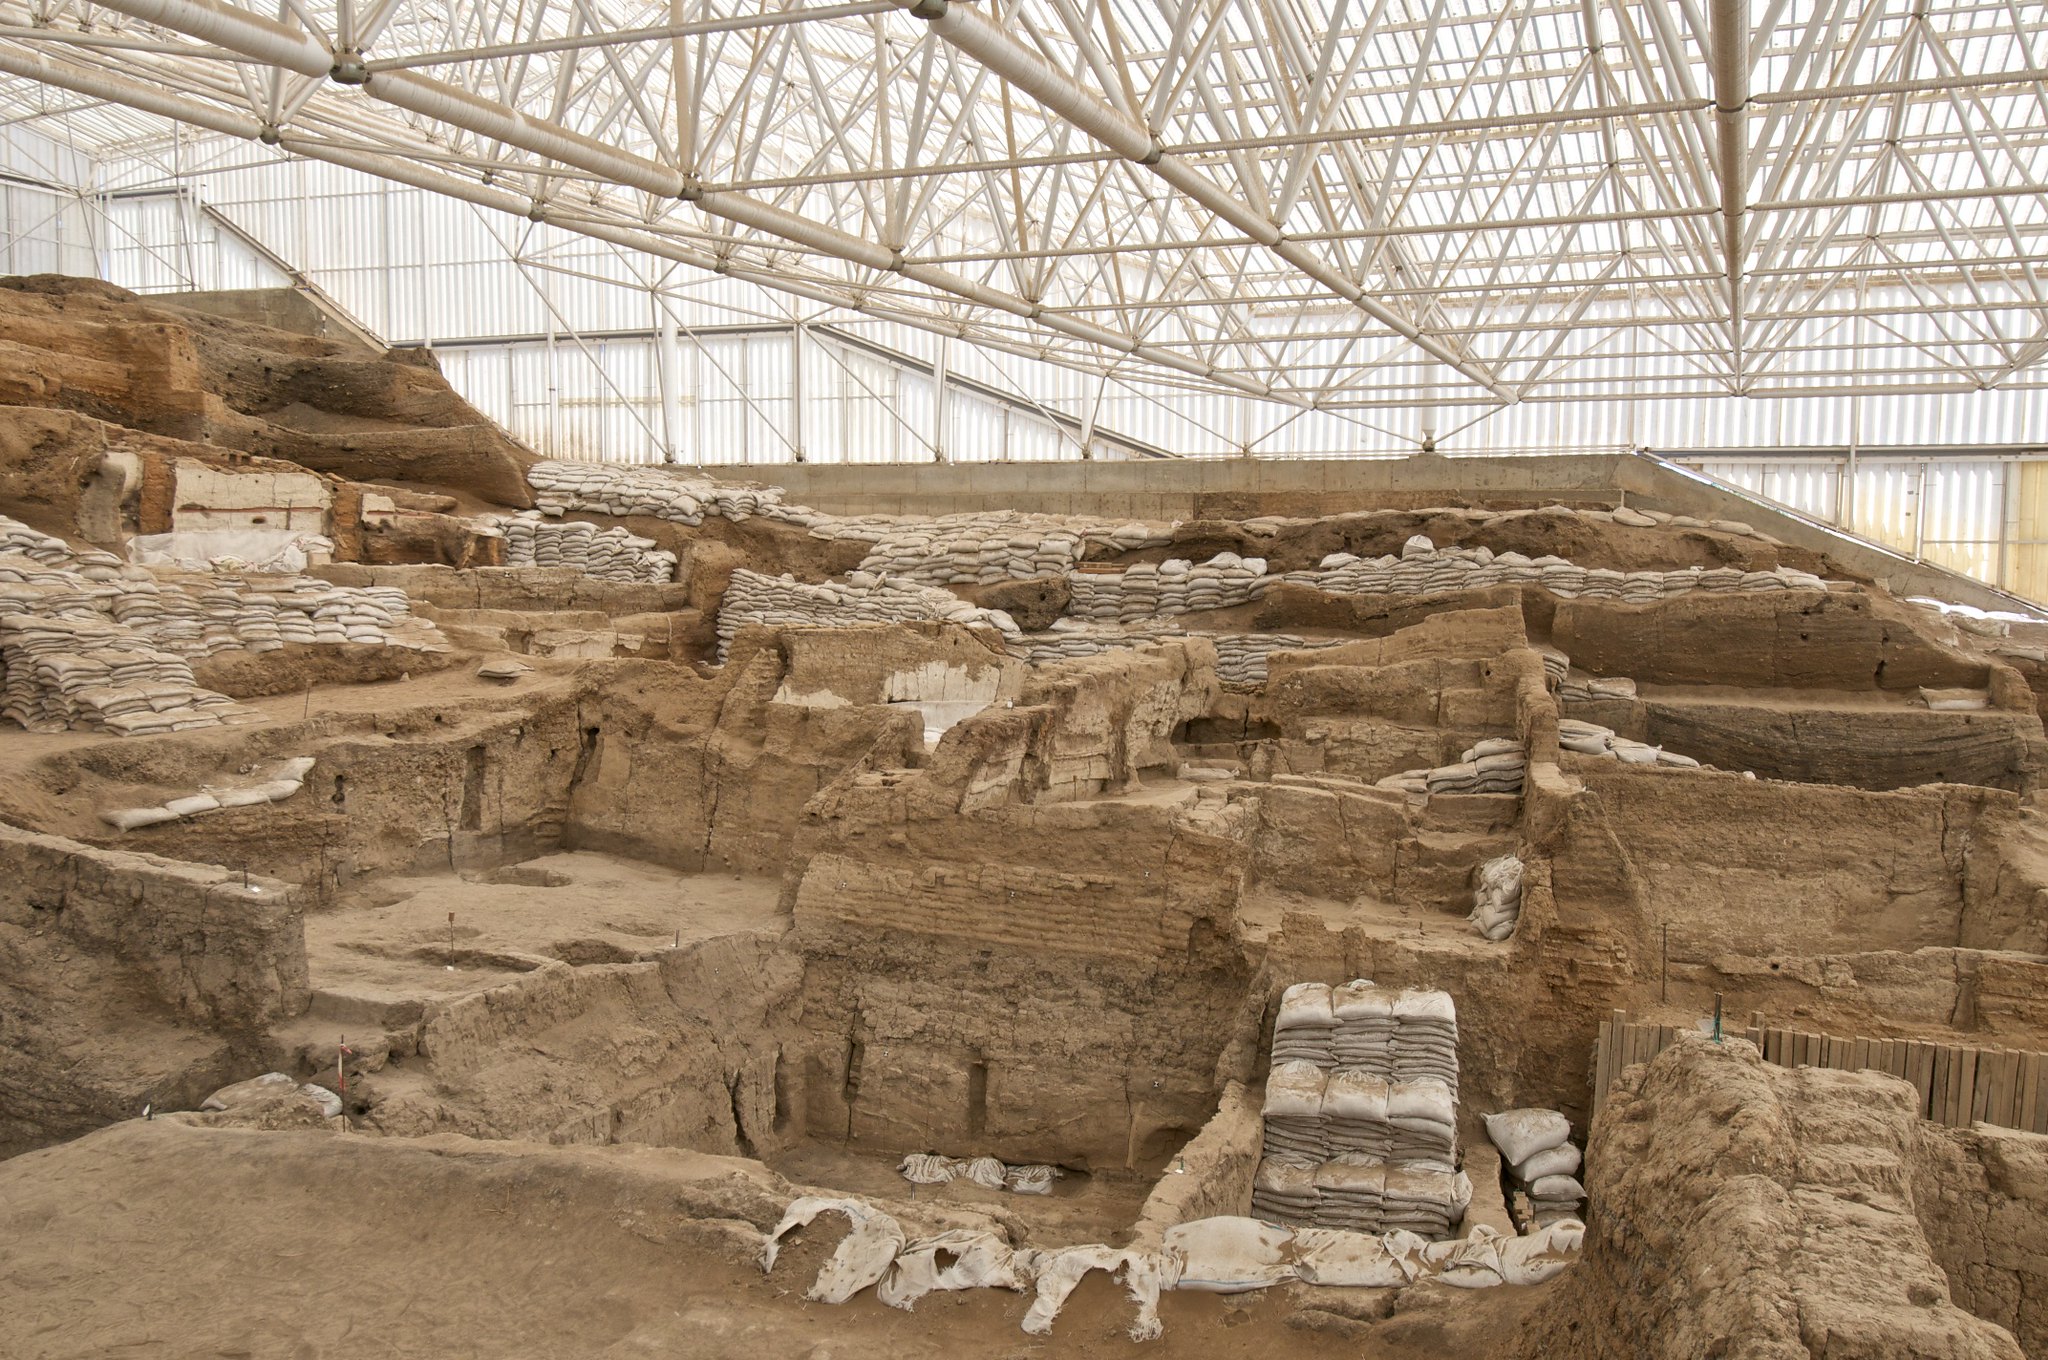 Excavation area, mainly beige bricks, with roof-scaffolding overhead